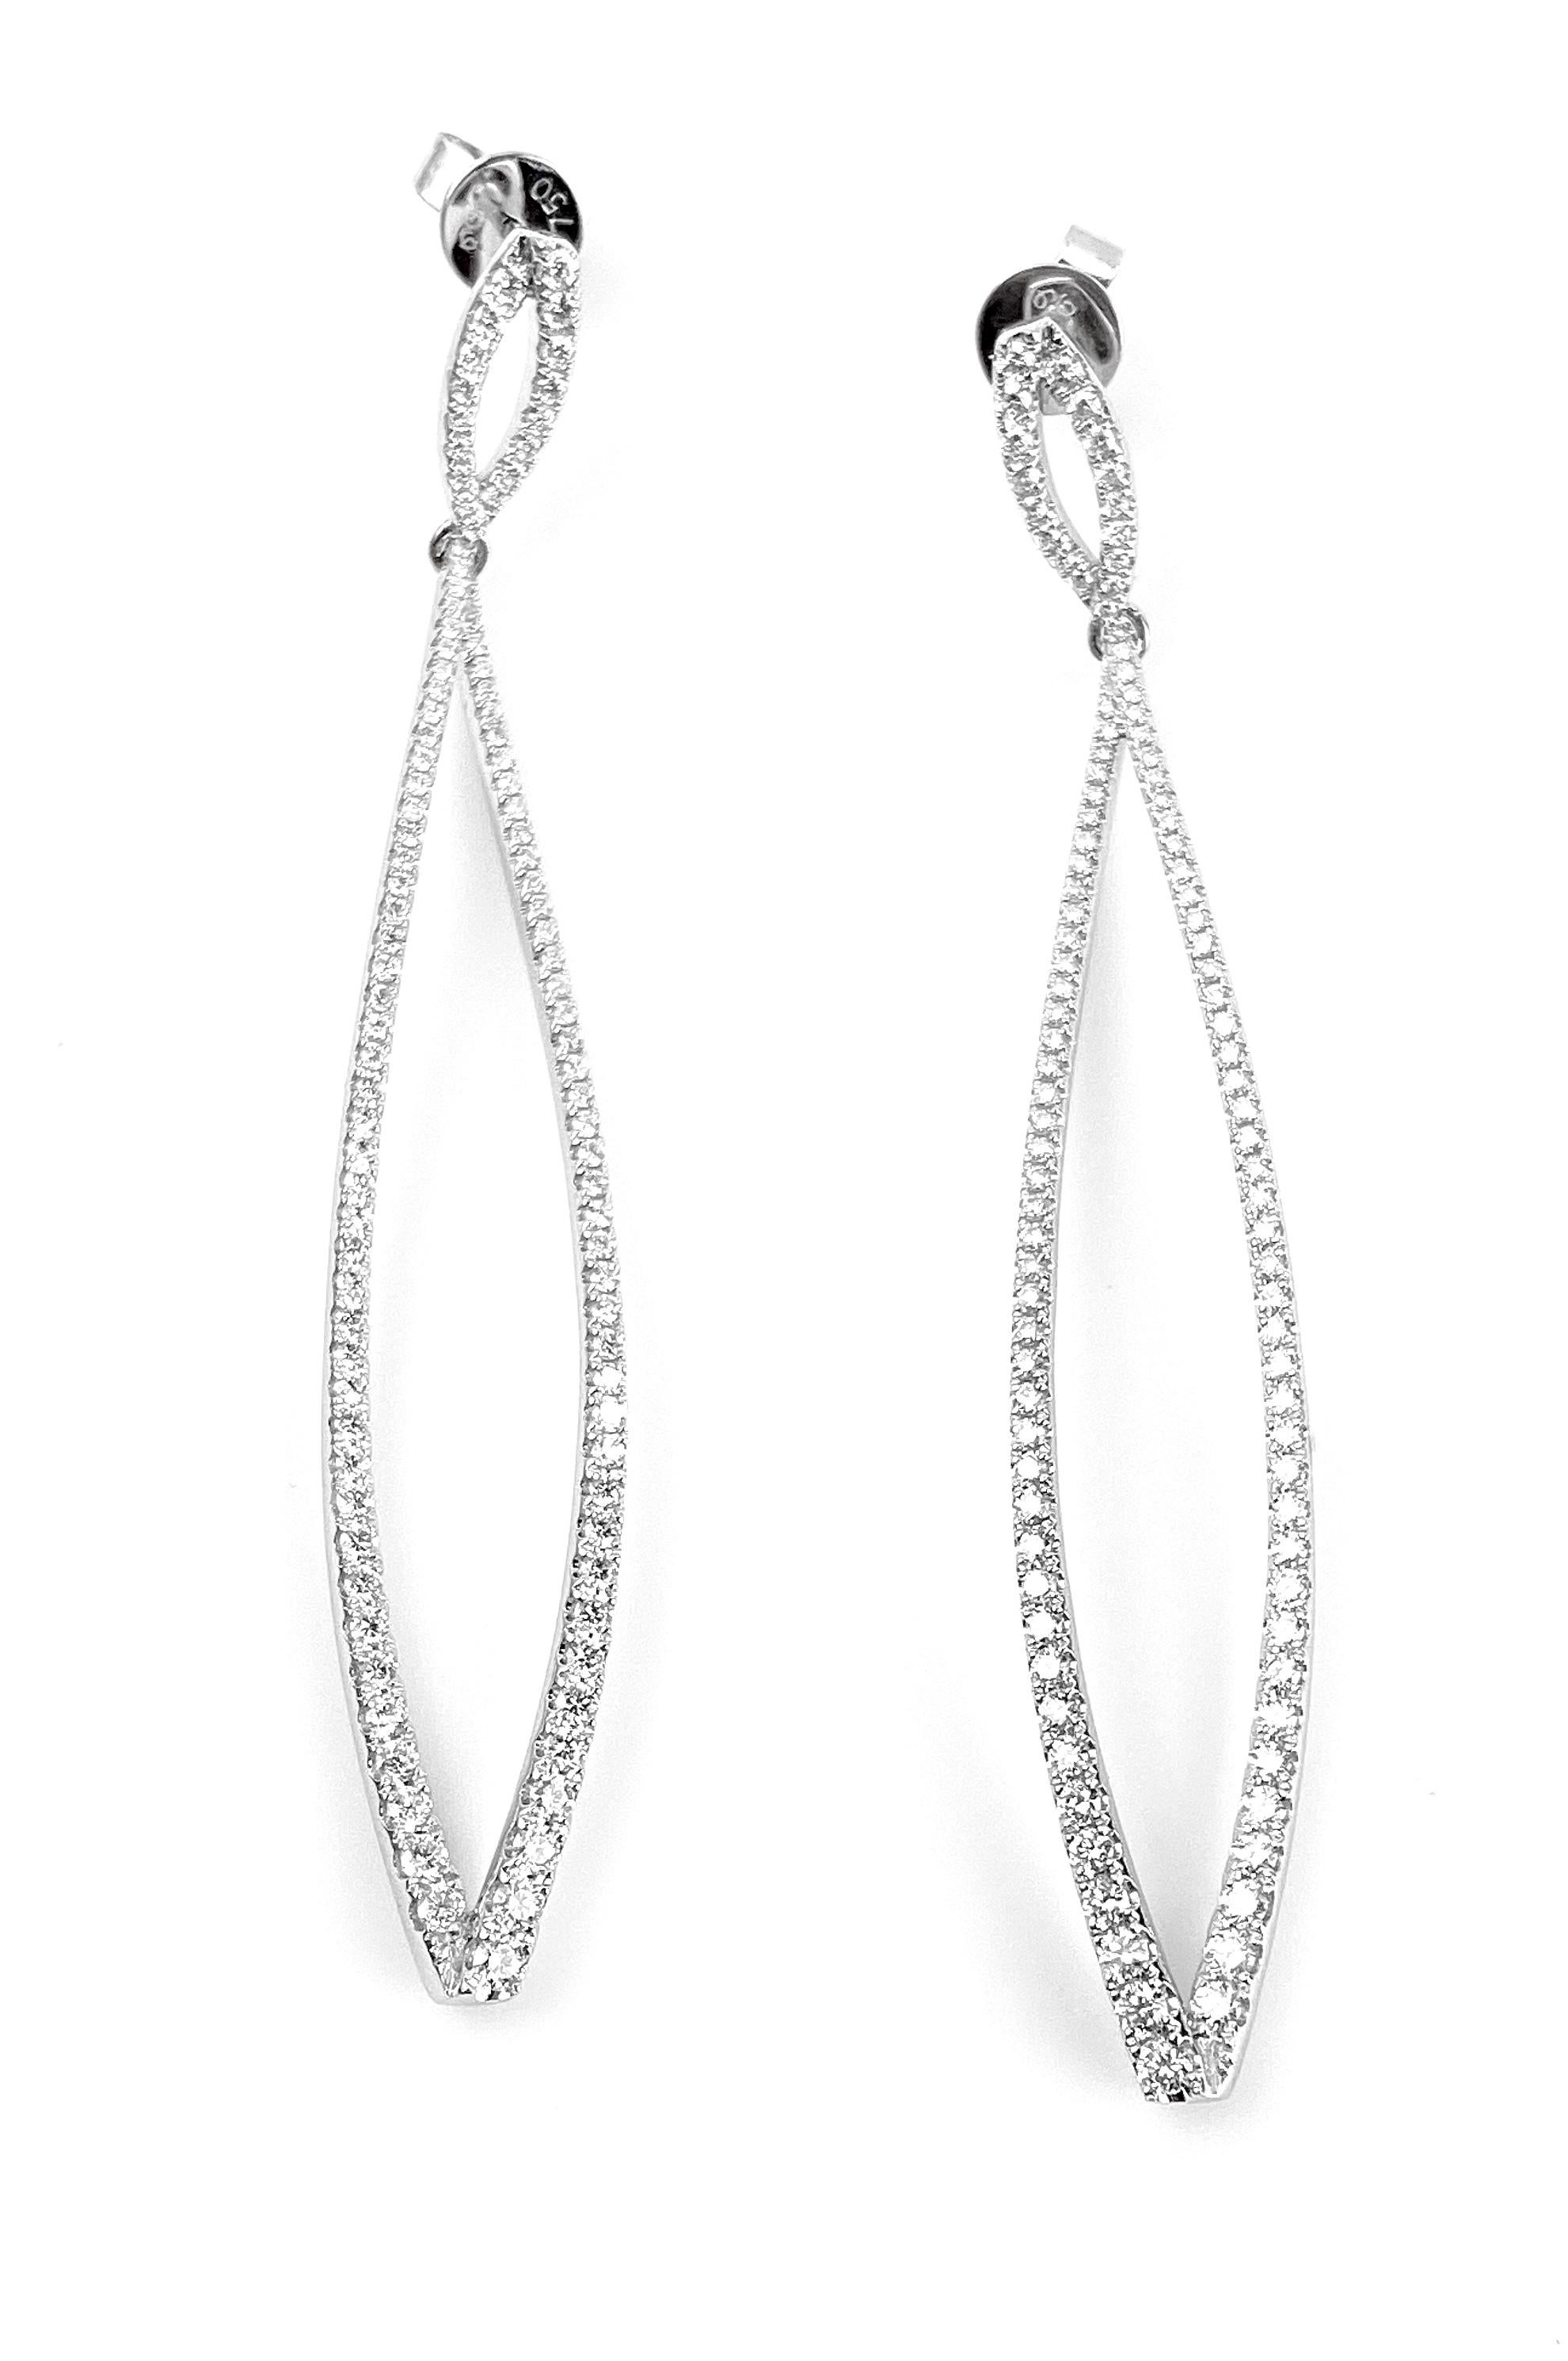 Long dangling marquise-shape earrings in 18kt white gold, with 206 diamonds for a total of 0.82ct total. Held with heavy backings.